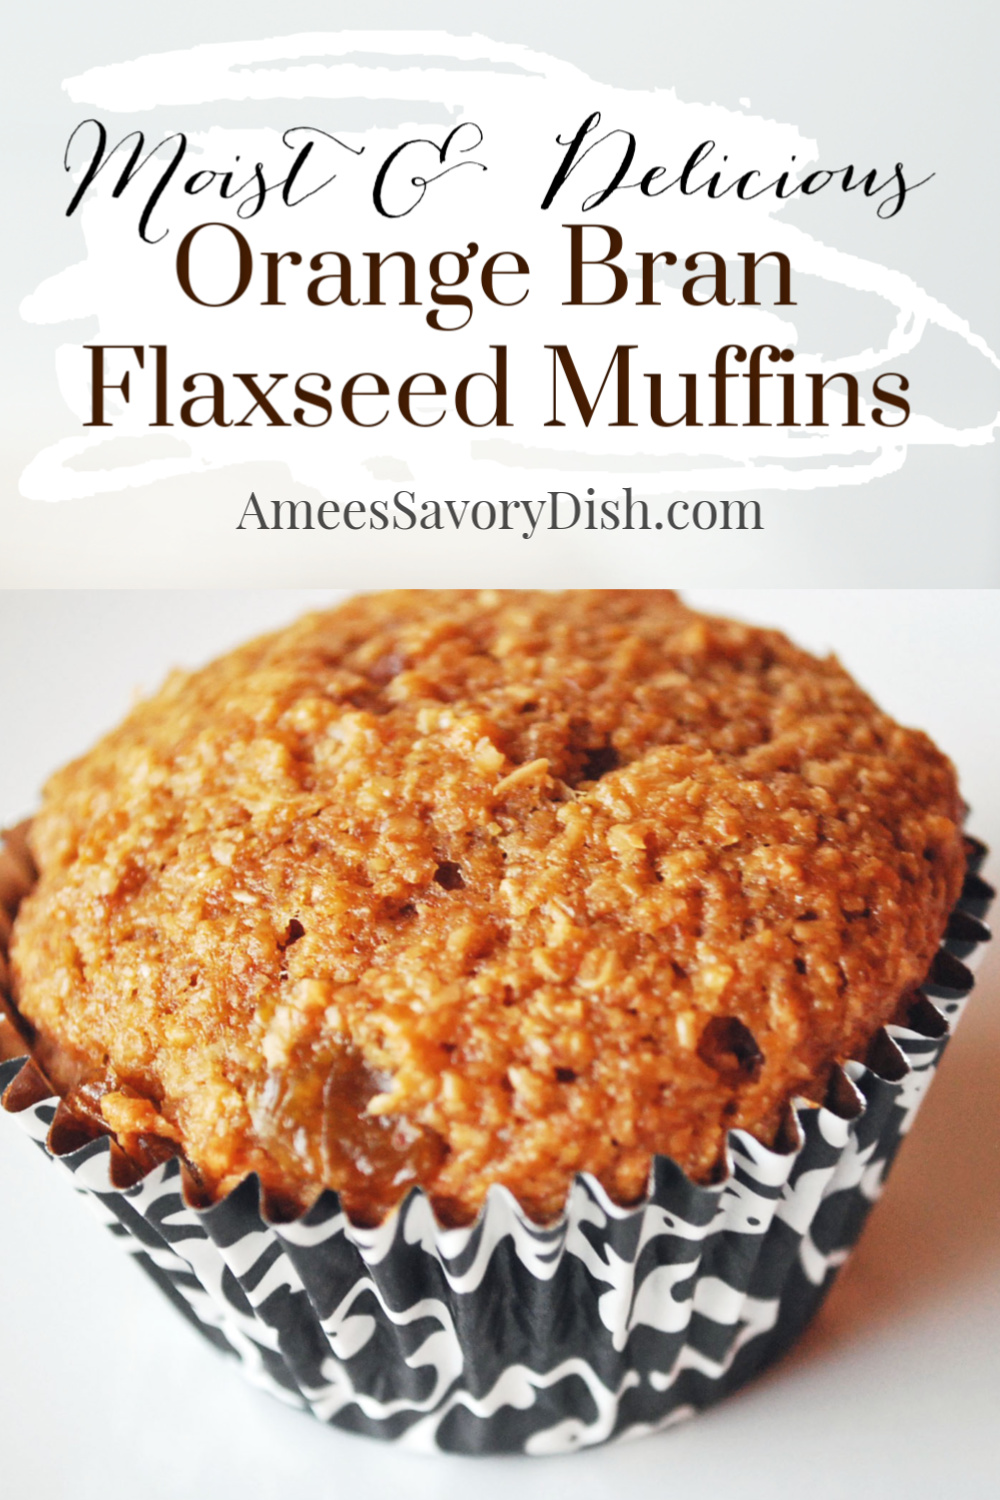 Orange Bran Flax Muffins are moist and delicious, made with oat bran, spelt flour, flaxseed, fresh orange and buttermilk.  This fiber-rich muffin is healthy and delicious! #muffinrecipe #branmuffins via @Ameessavorydish